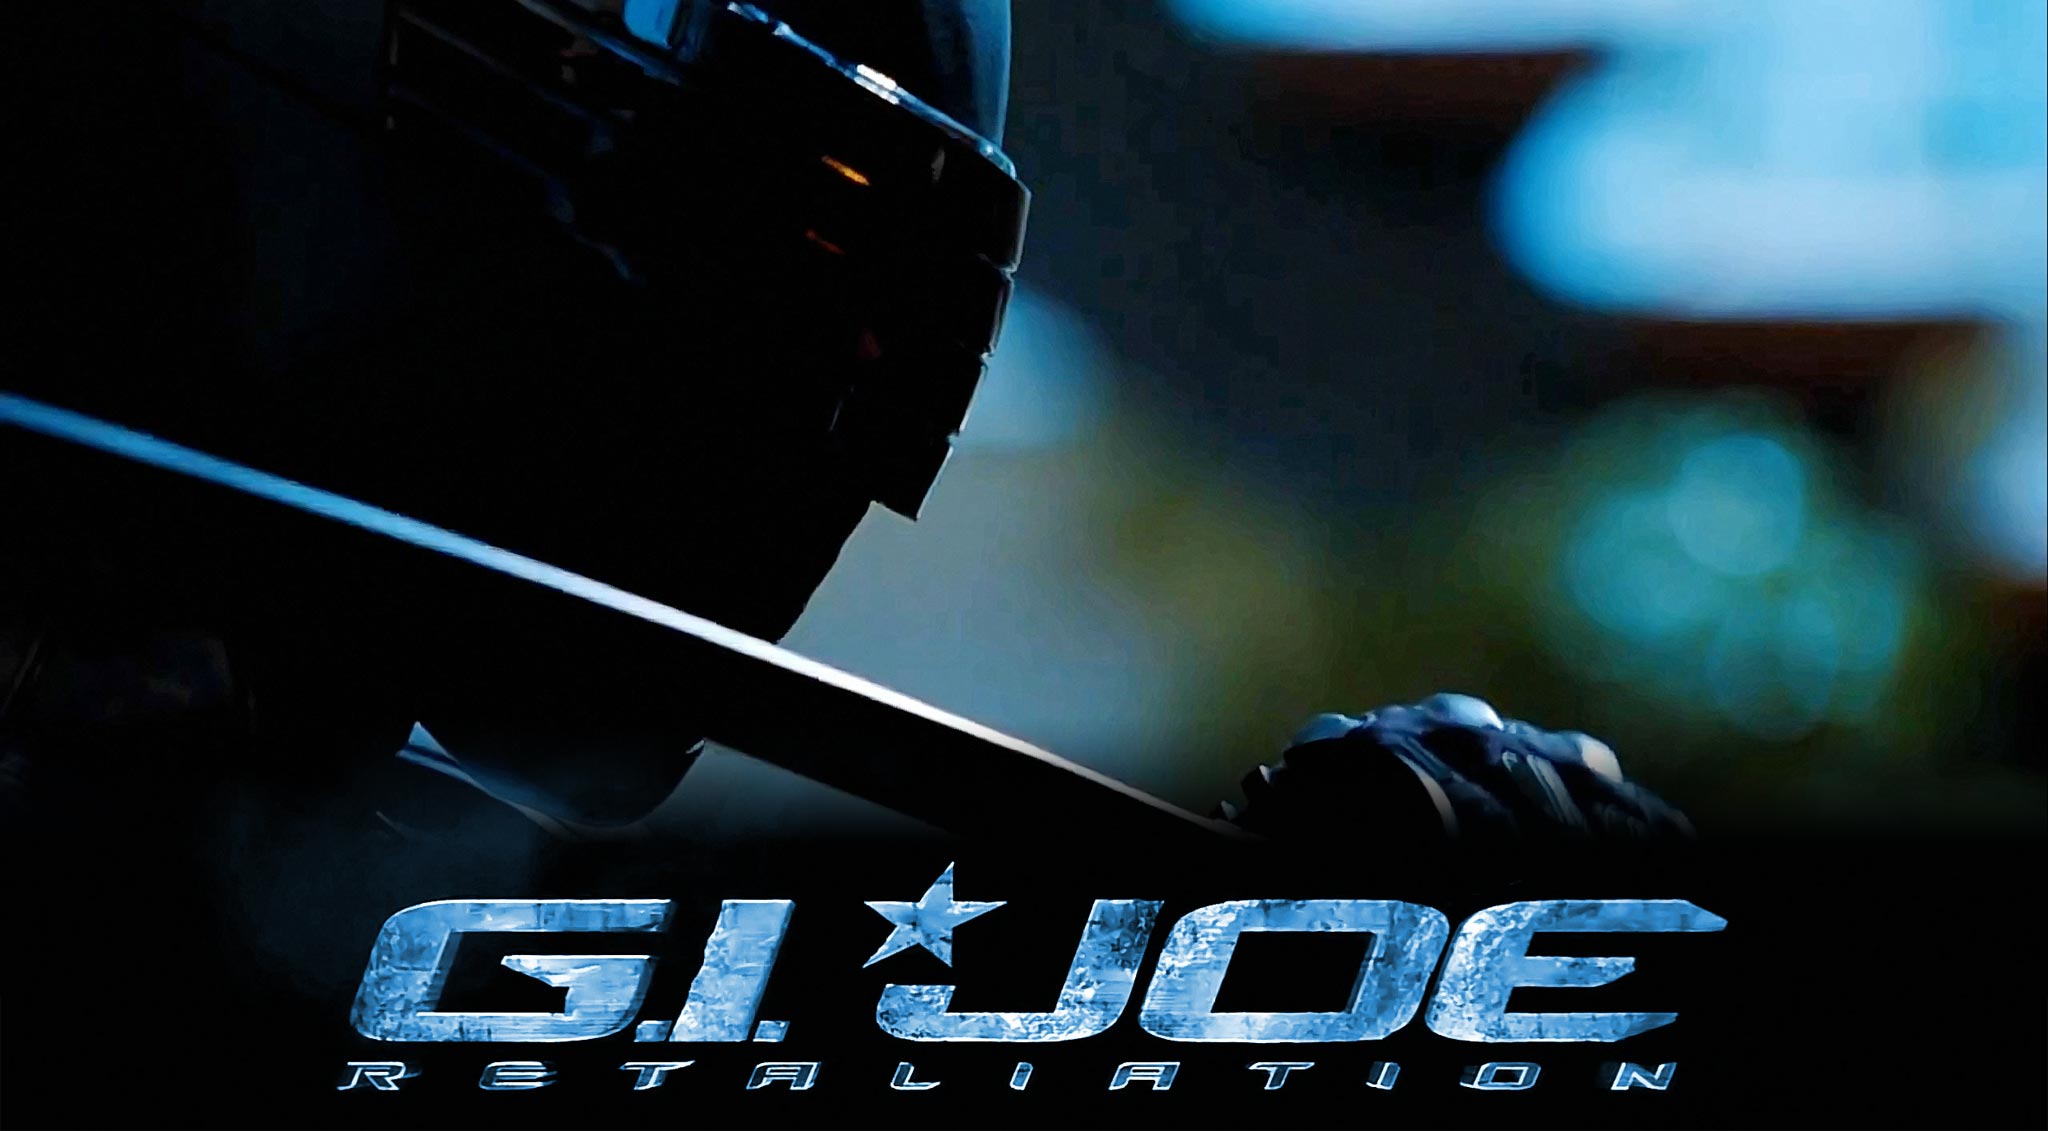 You can also upload and share your favorite G.I. Joe movie logo wallpapers....